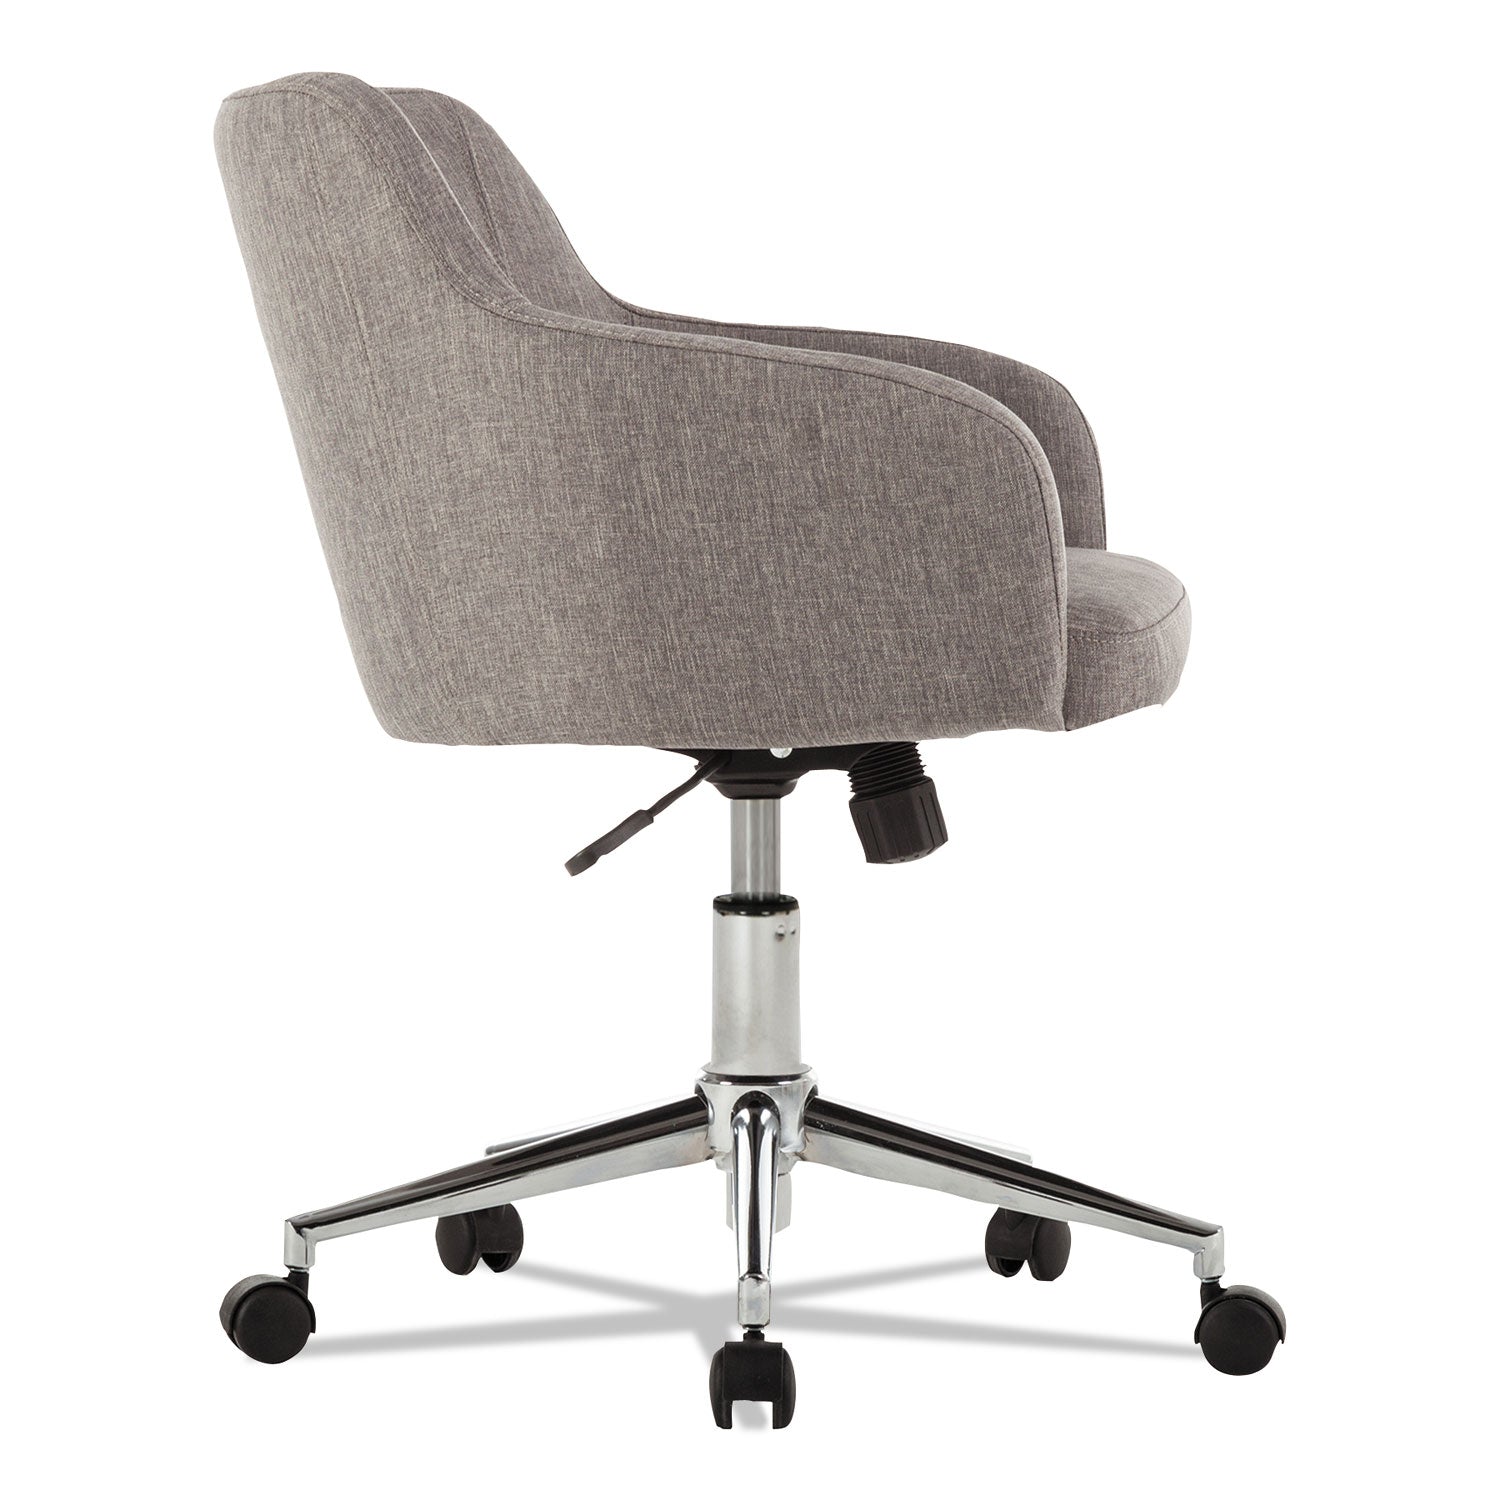 alera-captain-series-mid-back-chair-supports-up-to-275-lb-175-to-205-seat-height-gray-tweed-seat-back-chrome-base_alecs4251 - 3